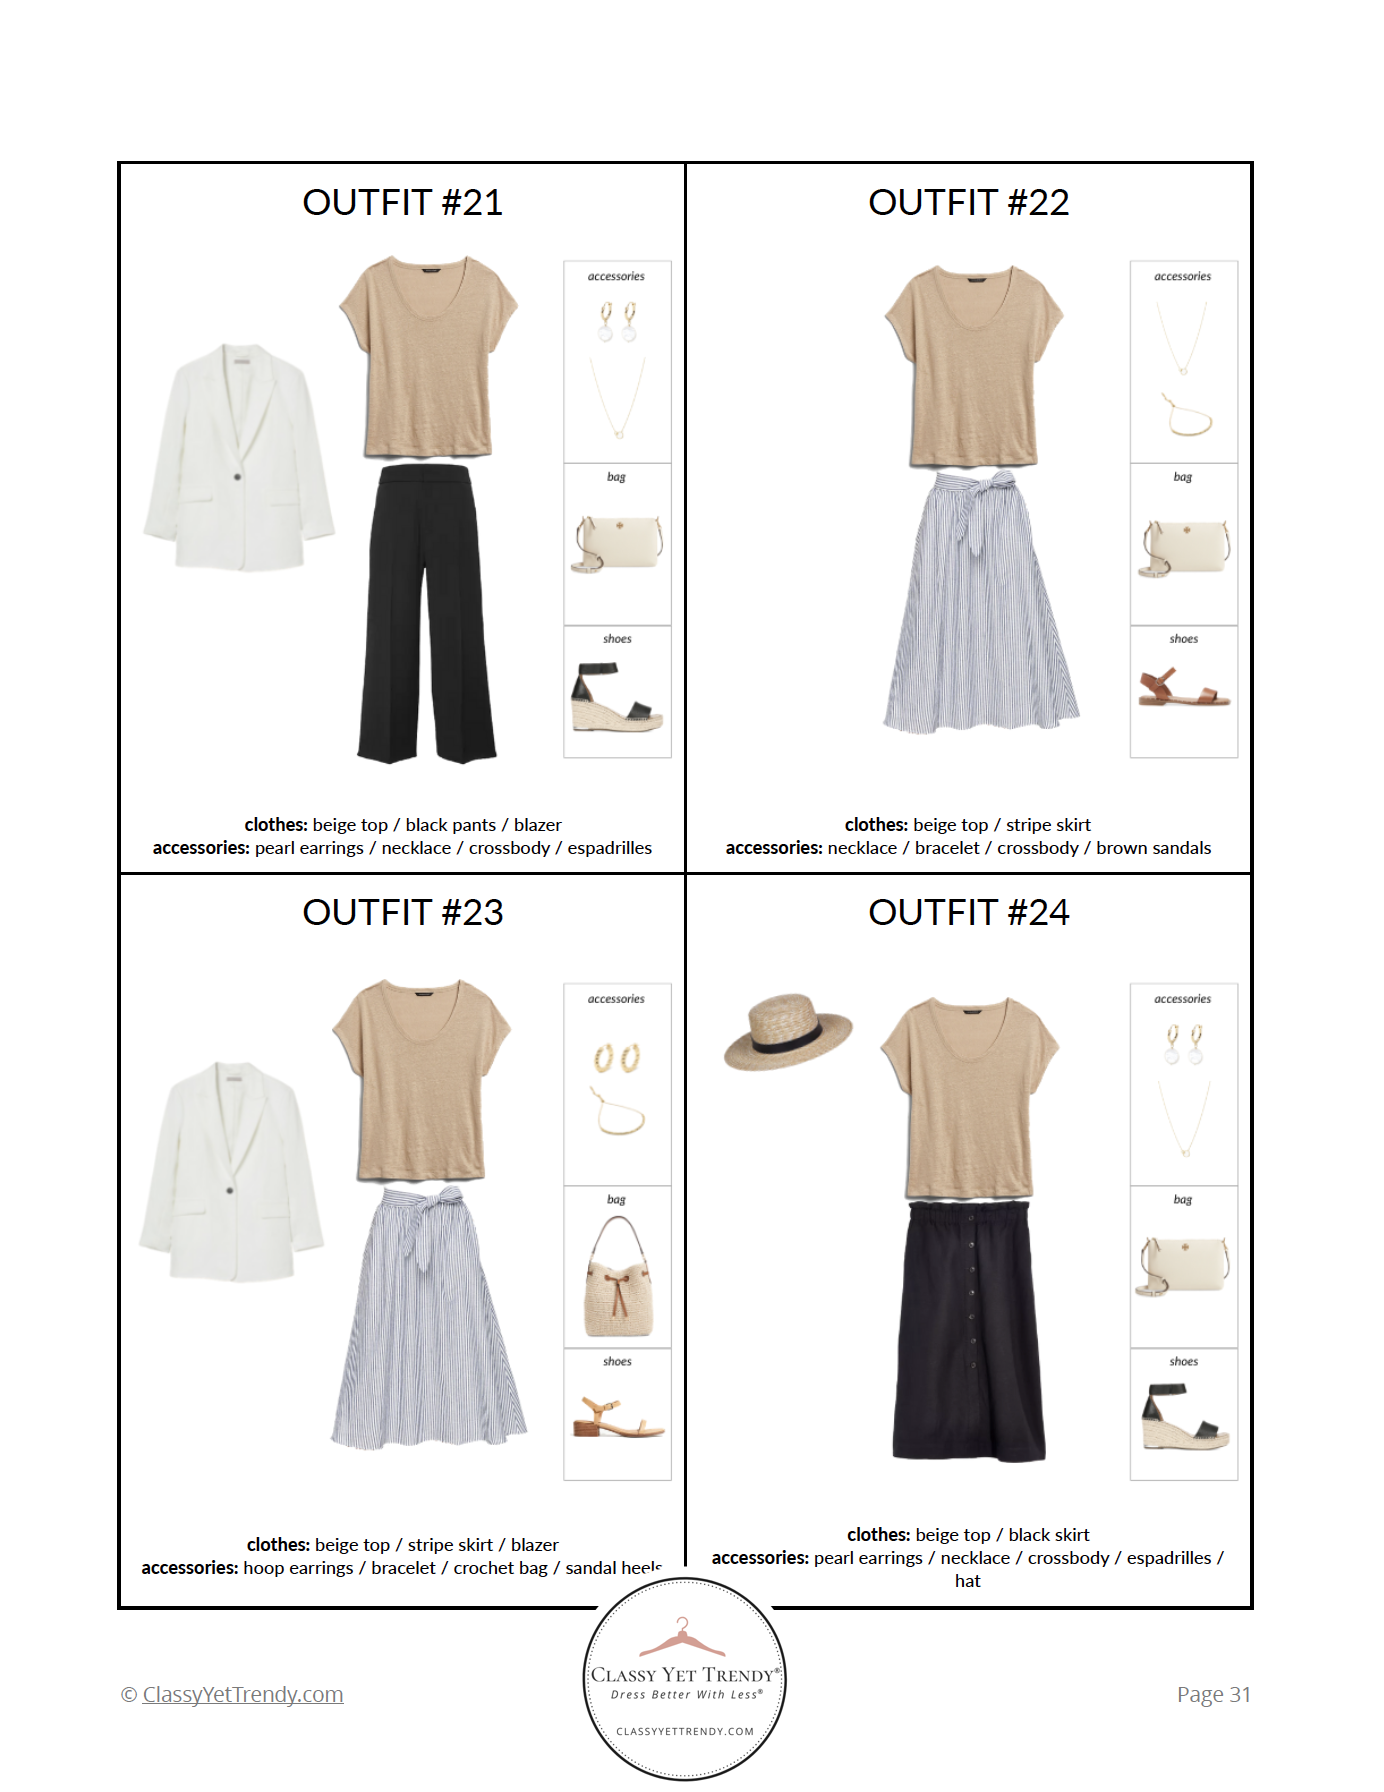 The French Minimalist Capsule Wardrobe: Summer 2021 Collection